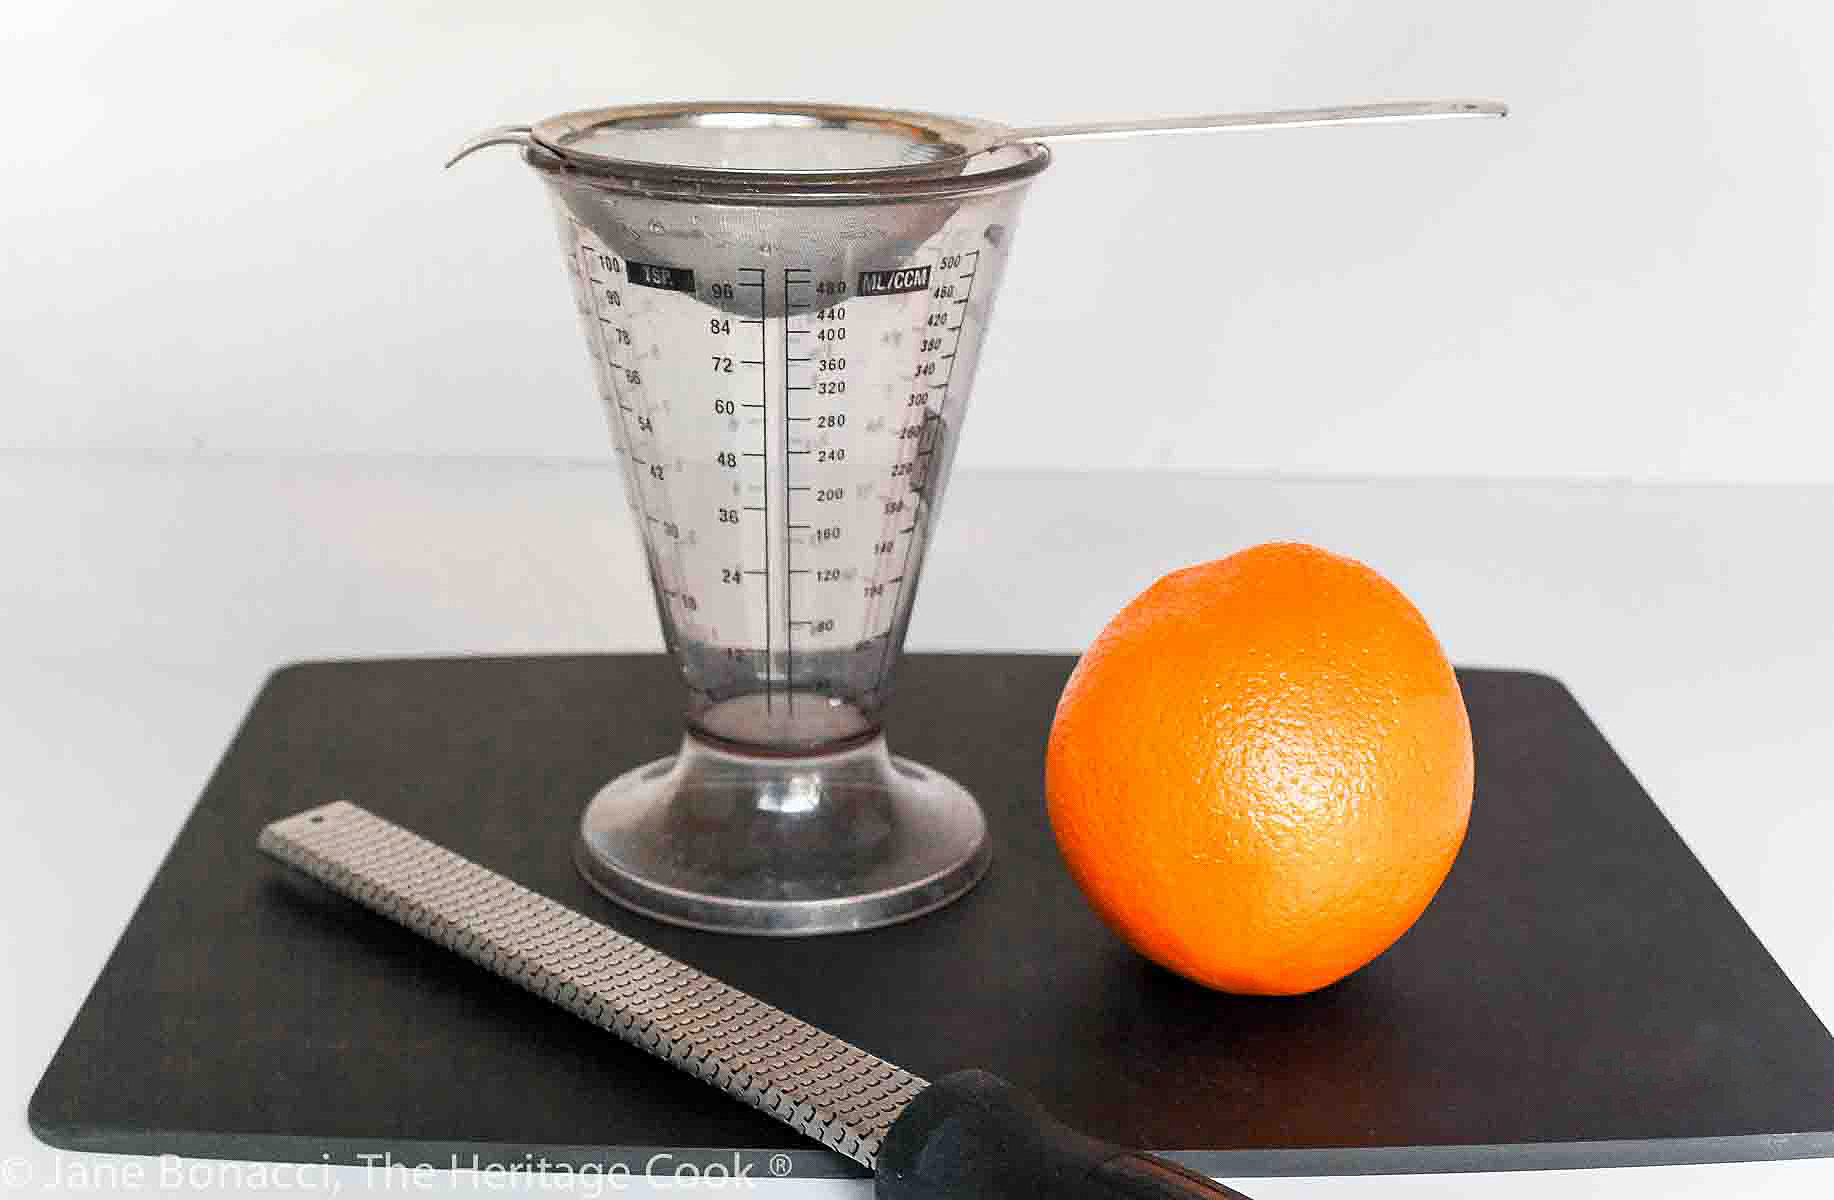 Set up for juicing the oranges with a zester, wire strainer in a measuring cup and an orange. . 